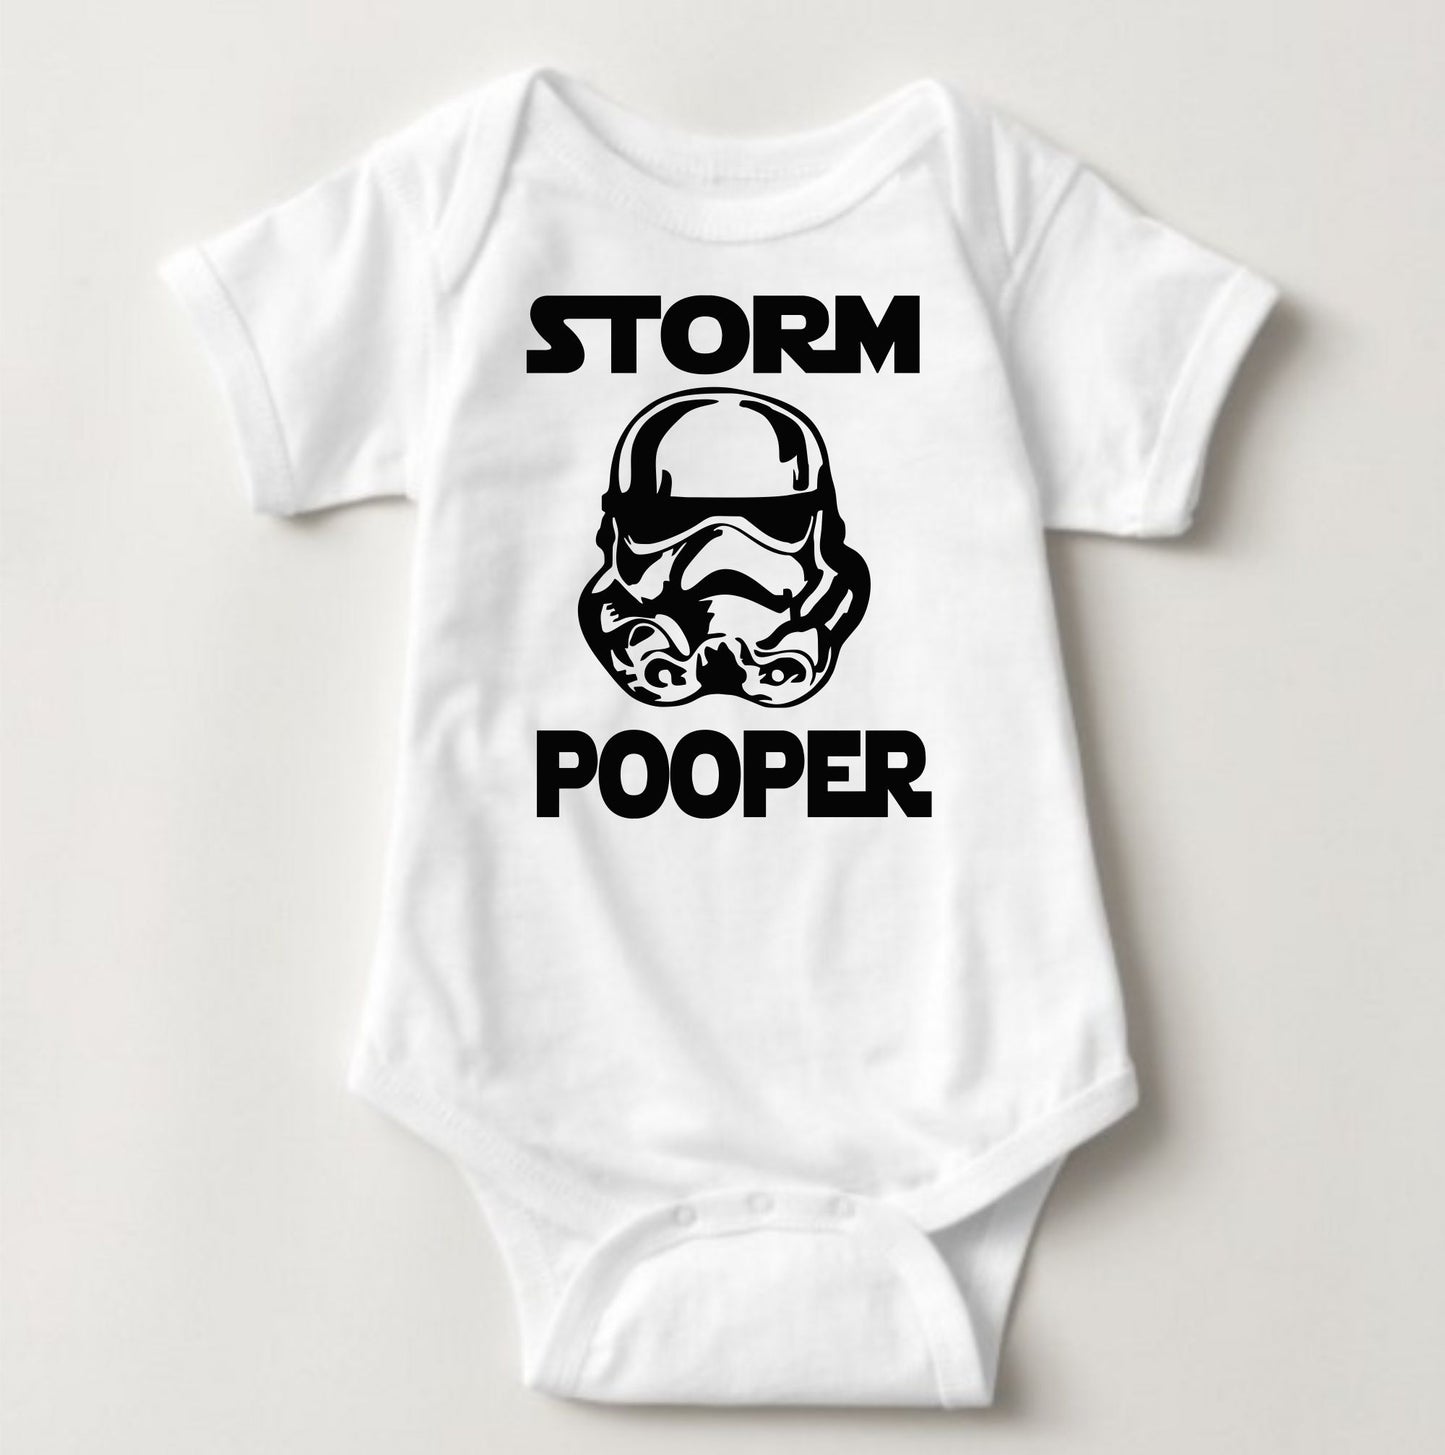 Baby Star Wars Collection Onesies - Storm Poopers